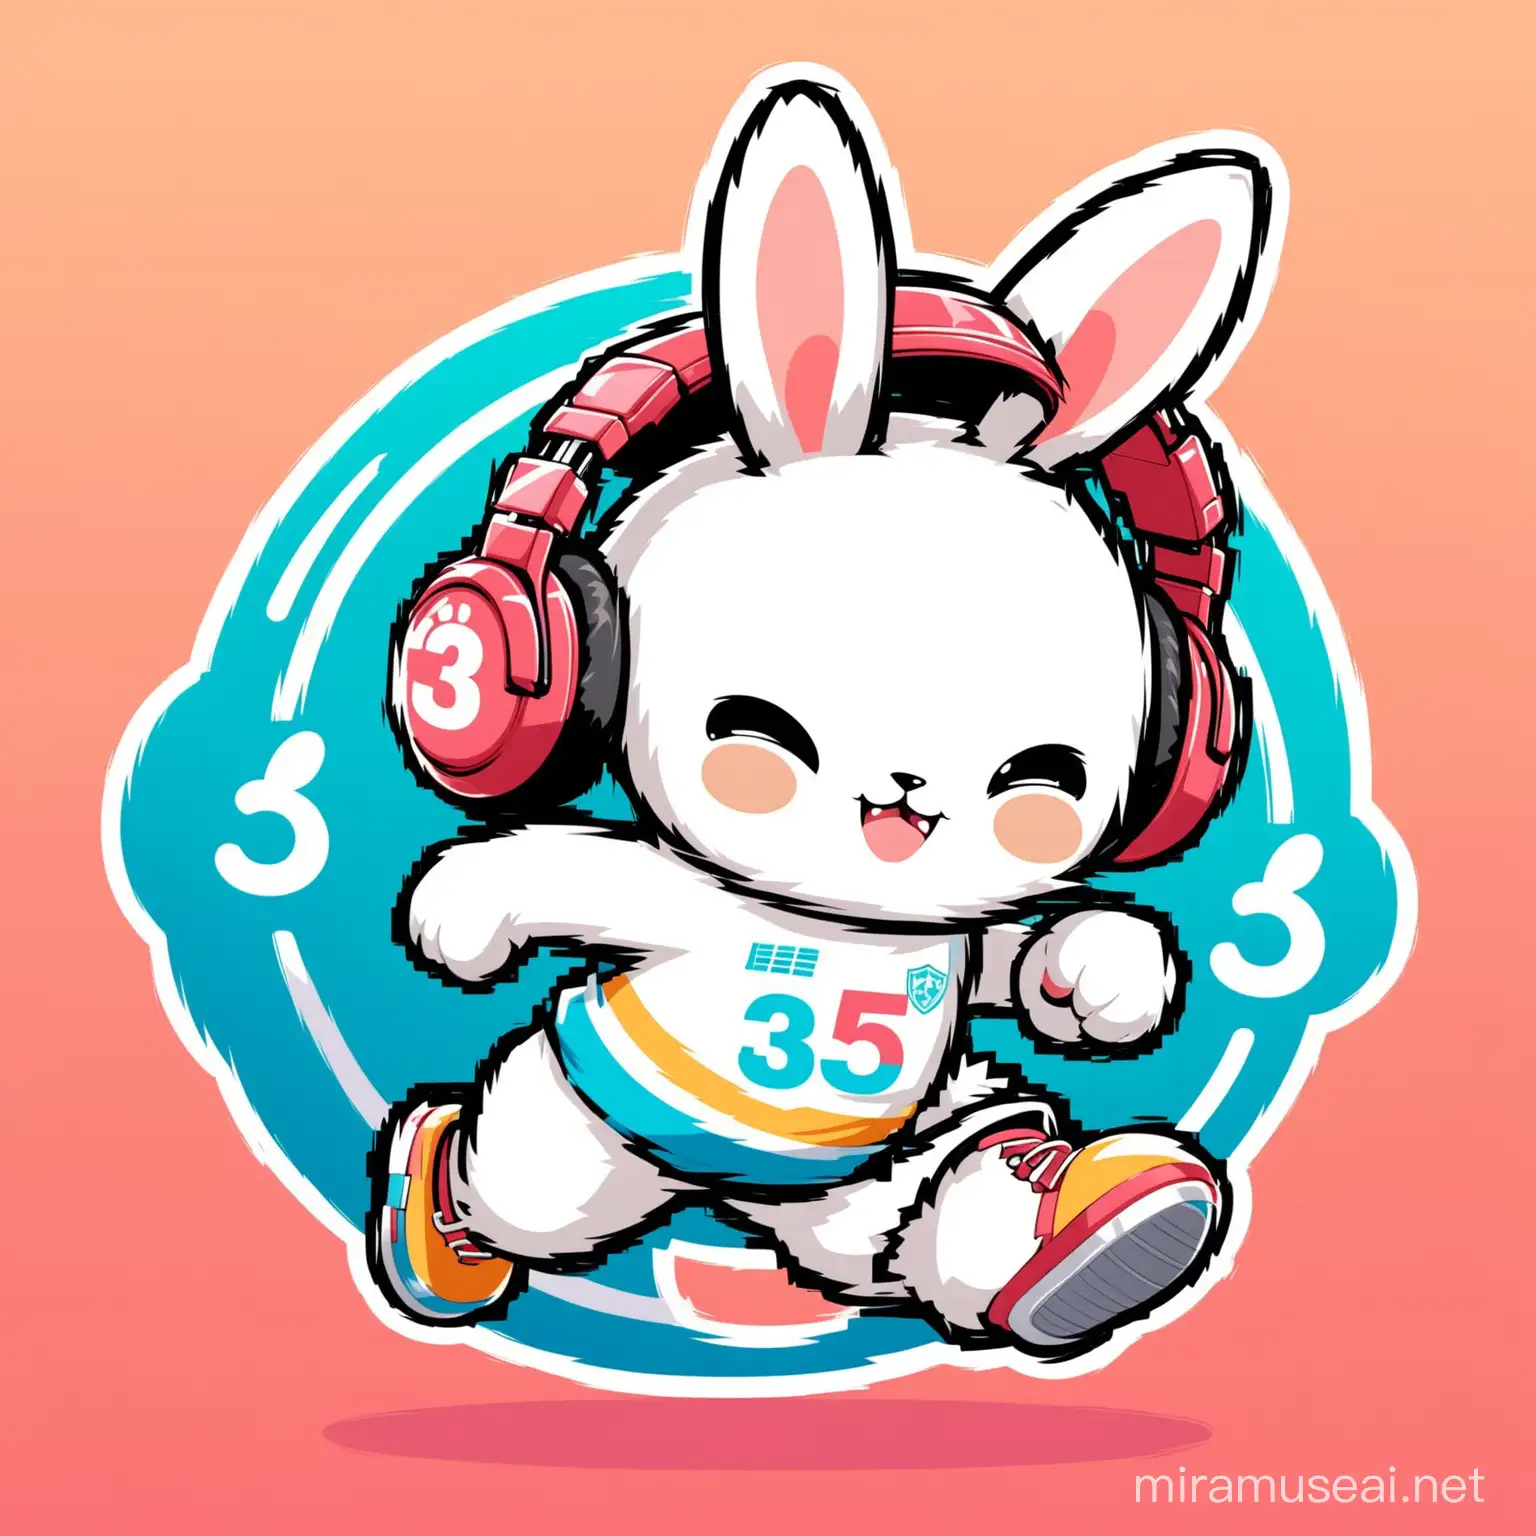 logo, bunny, mascot, sport, have full body bunny, wear headphone, caster, 35 degree inclined surface, motivate